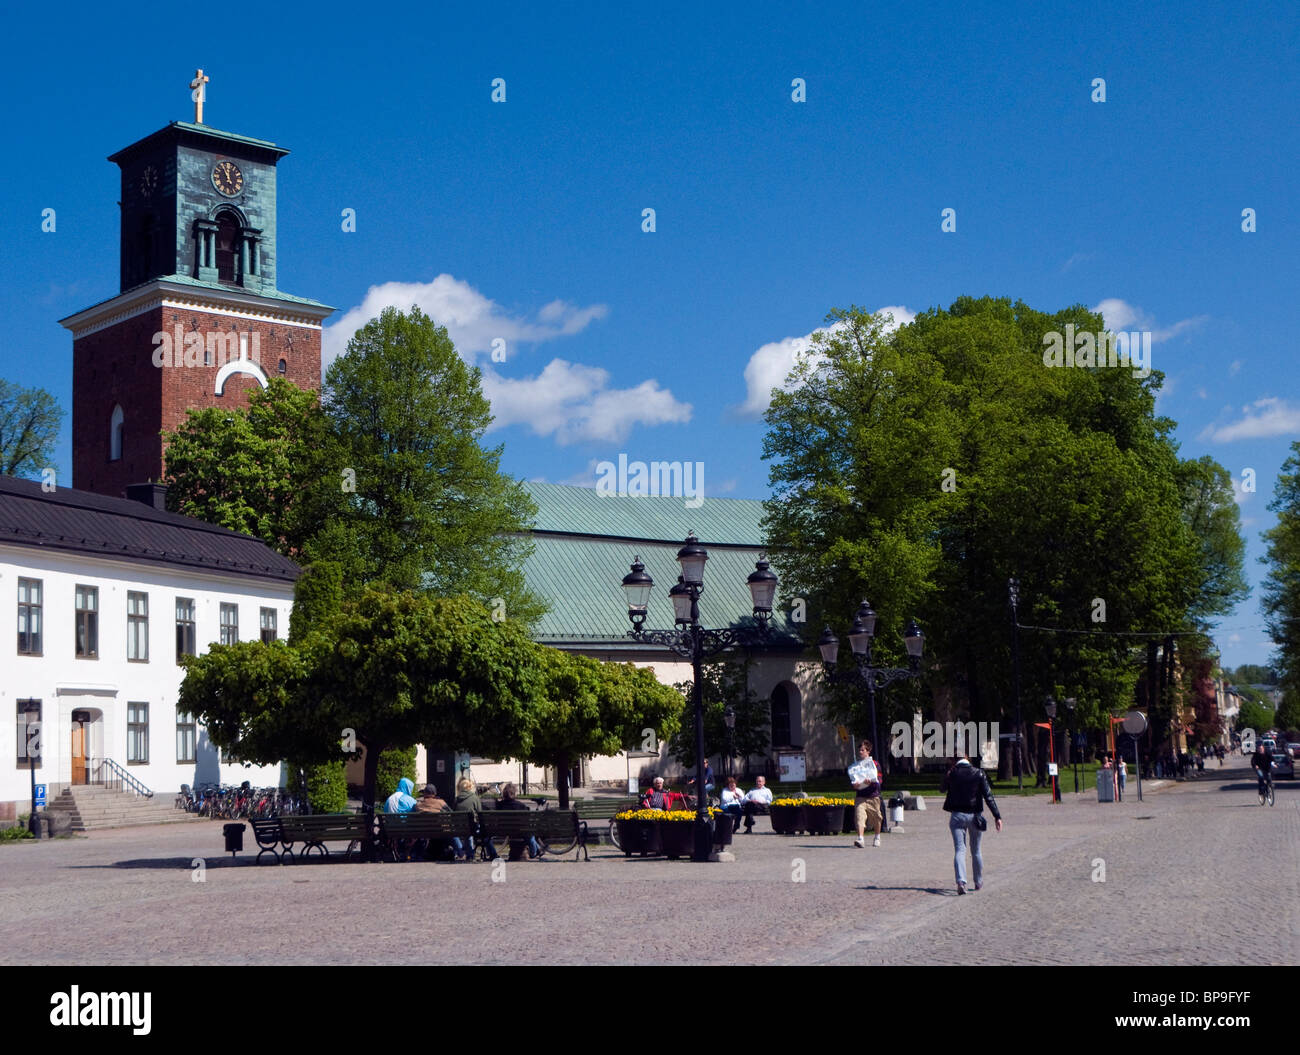 'Stora Torget' - the Big Square, in central Nyköping, Sweden. Tne church of s:t Nicolai in the back. Stock Photo